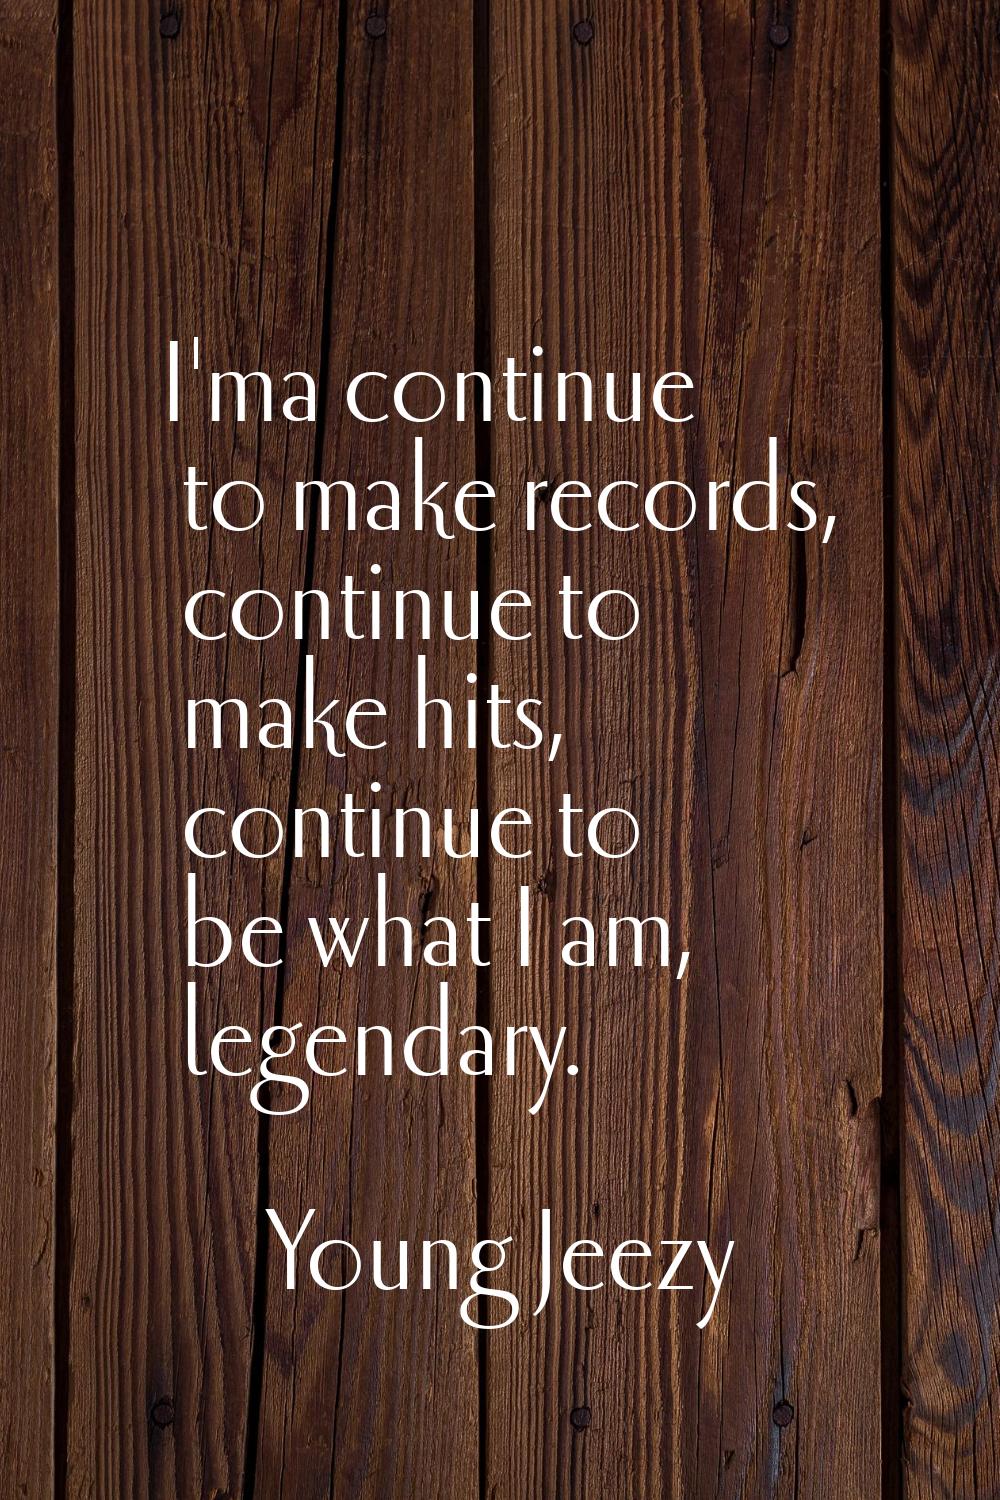 I'ma continue to make records, continue to make hits, continue to be what I am, legendary.